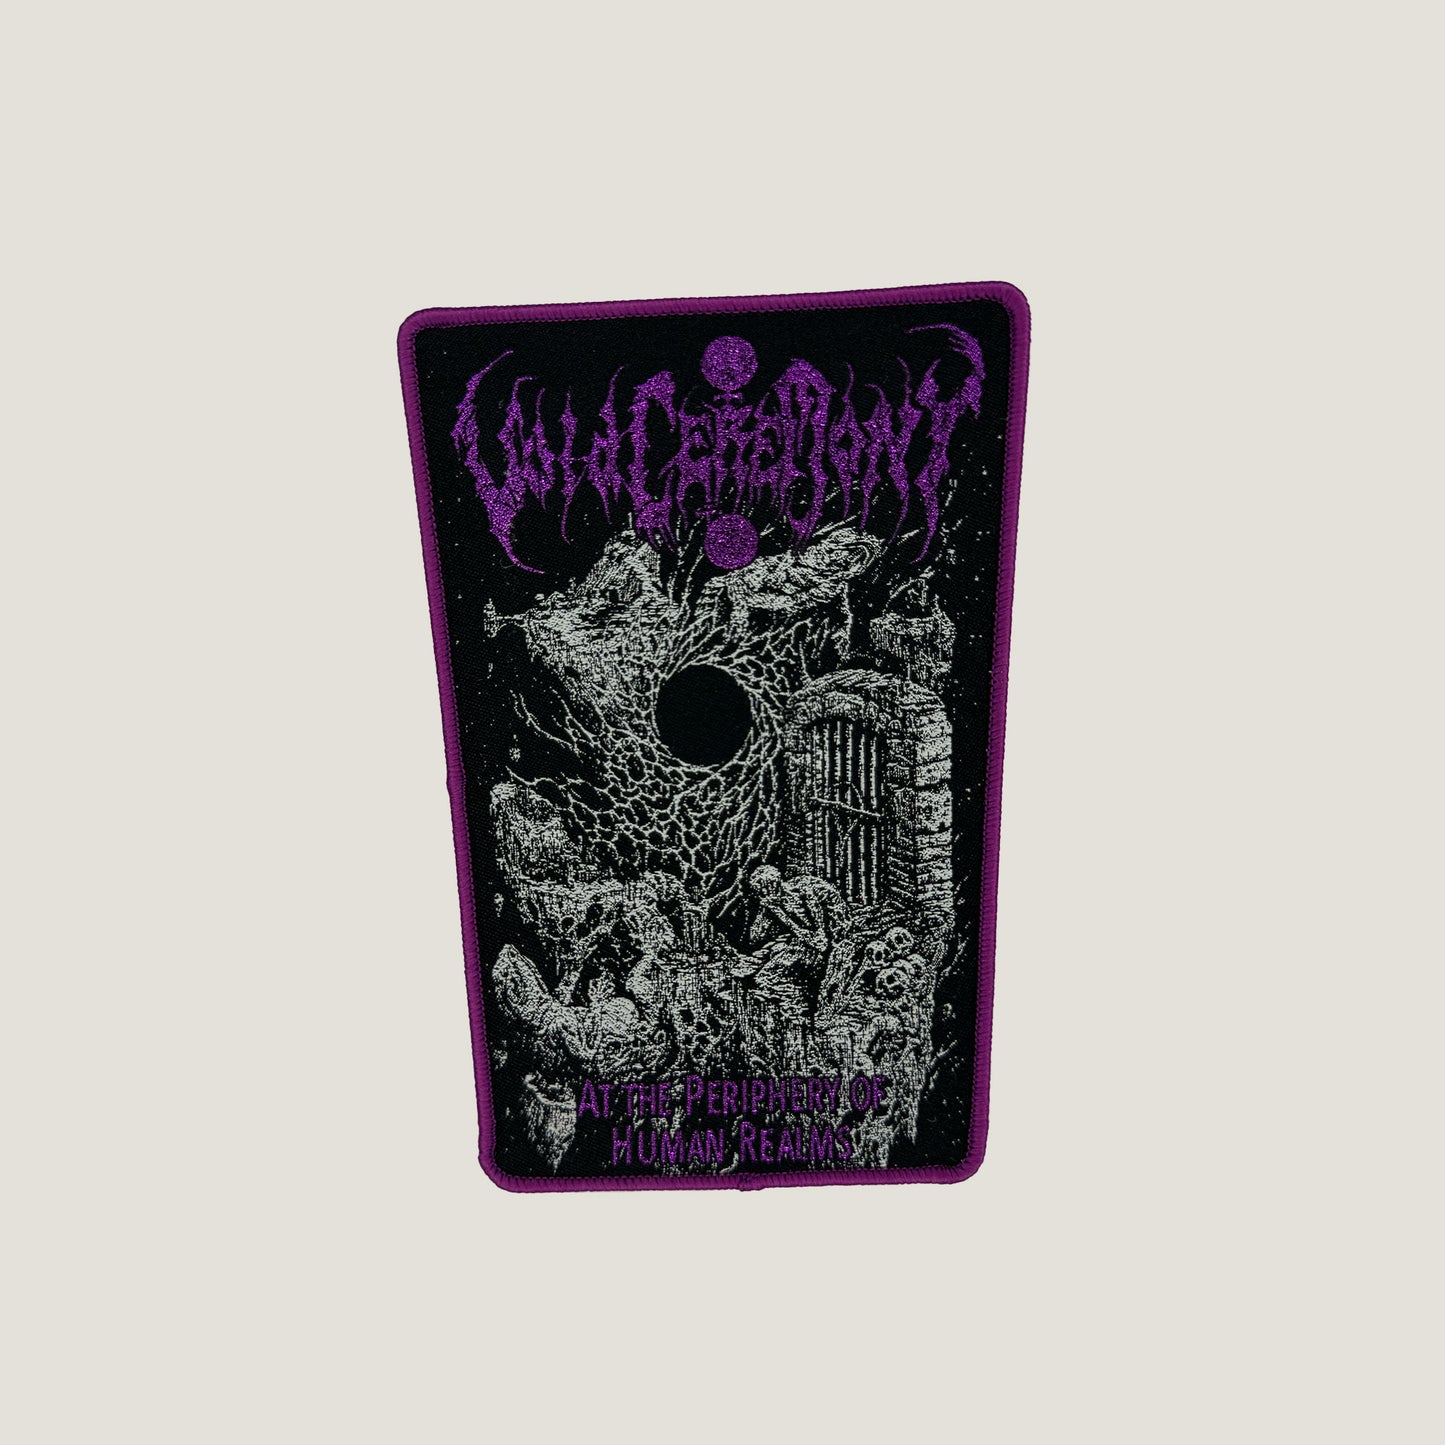 Temporal Dimensions Patches VoidCeremony At the Periphery of Human Realms Purple Border Woven Patch